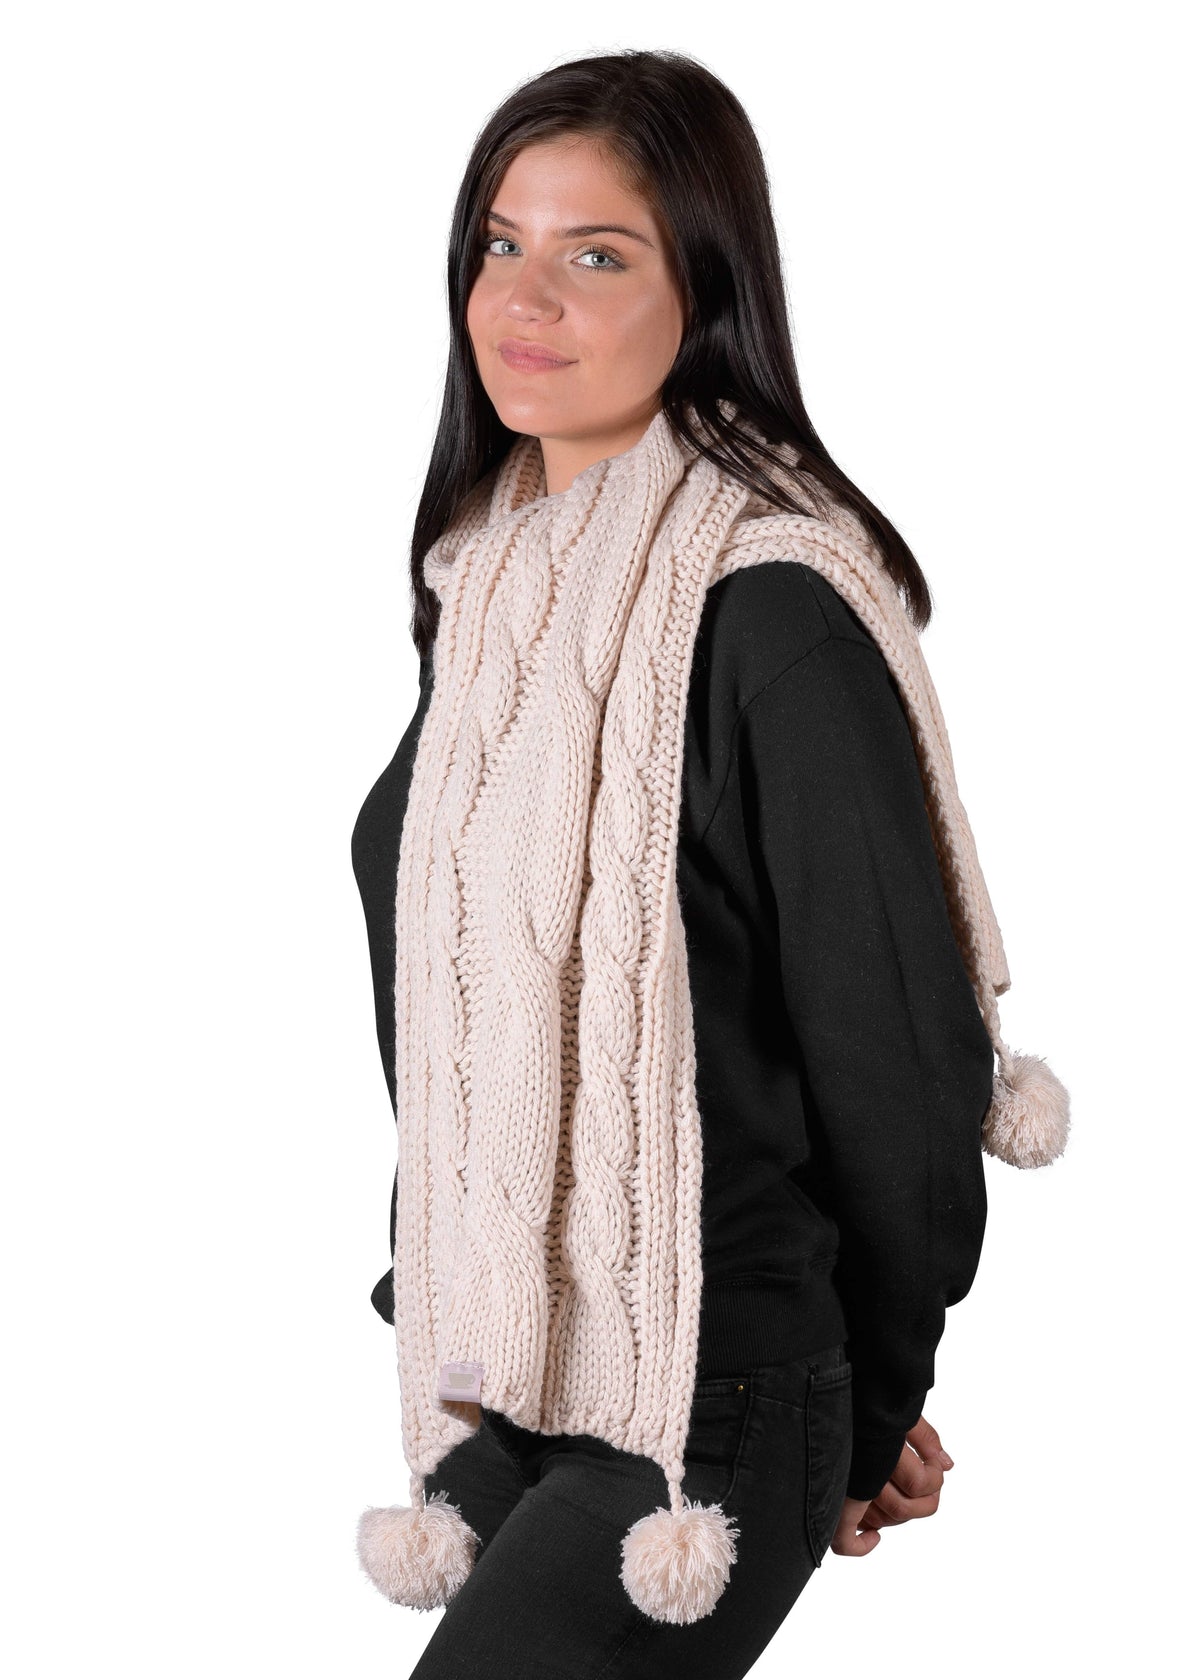 Textured Cable Knit Pom Pom Scarf - Millennial Pink - LATTELOVE Co.